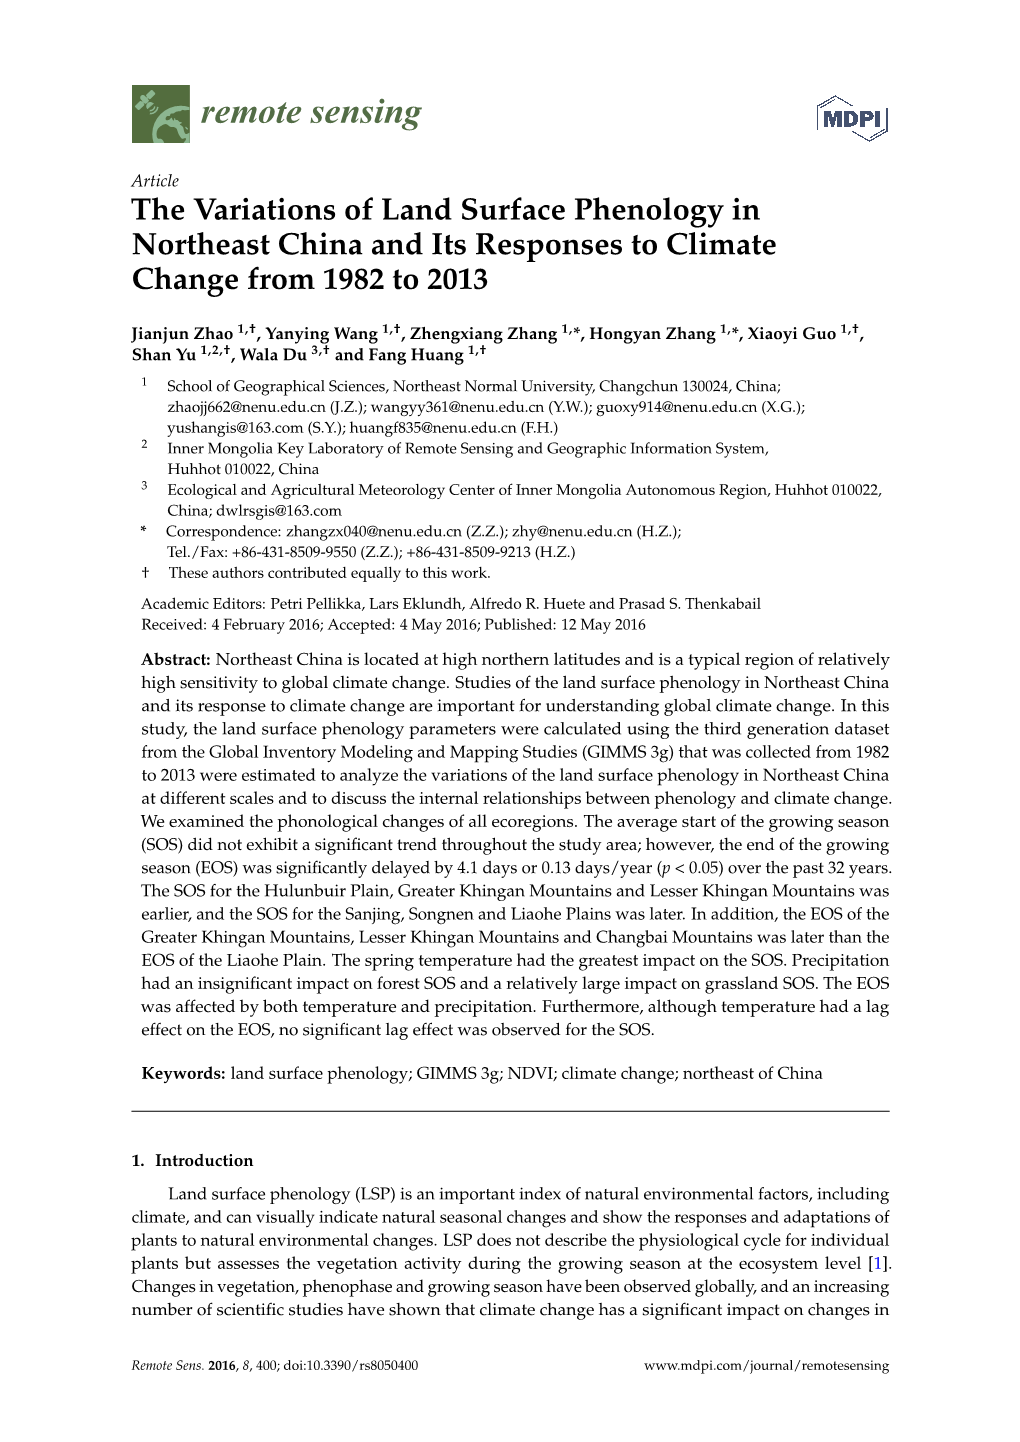 The Variations of Land Surface Phenology in Northeast China and Its Responses to Climate Change from 1982 to 2013